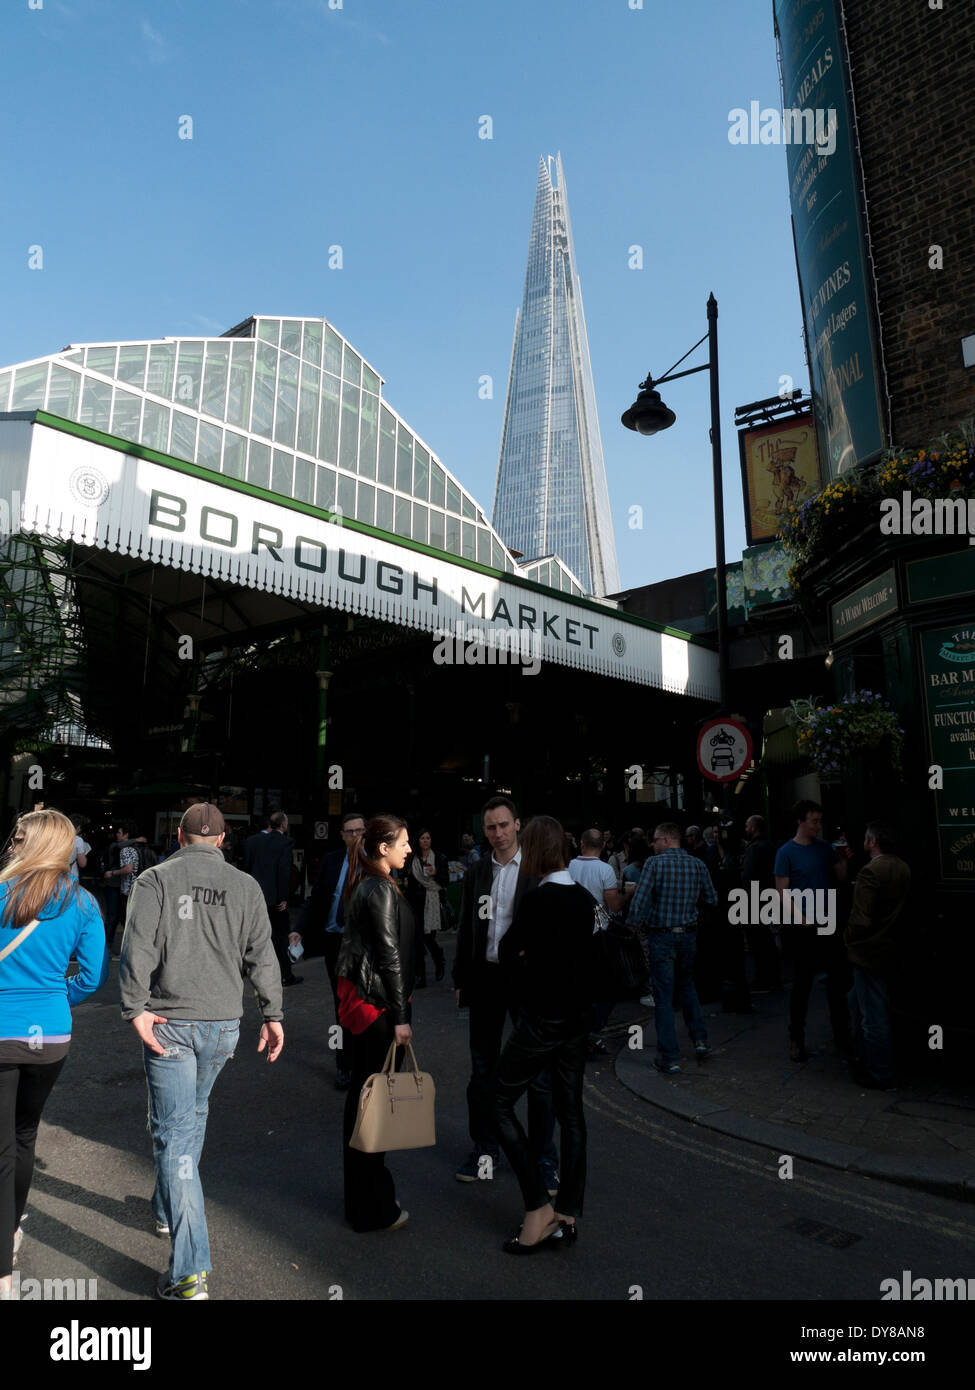 Borough Market sign vertical view with the Shard, entrance, people in street at London Bridge in Southward South London UK    KATHY DEWITT Stock Photo